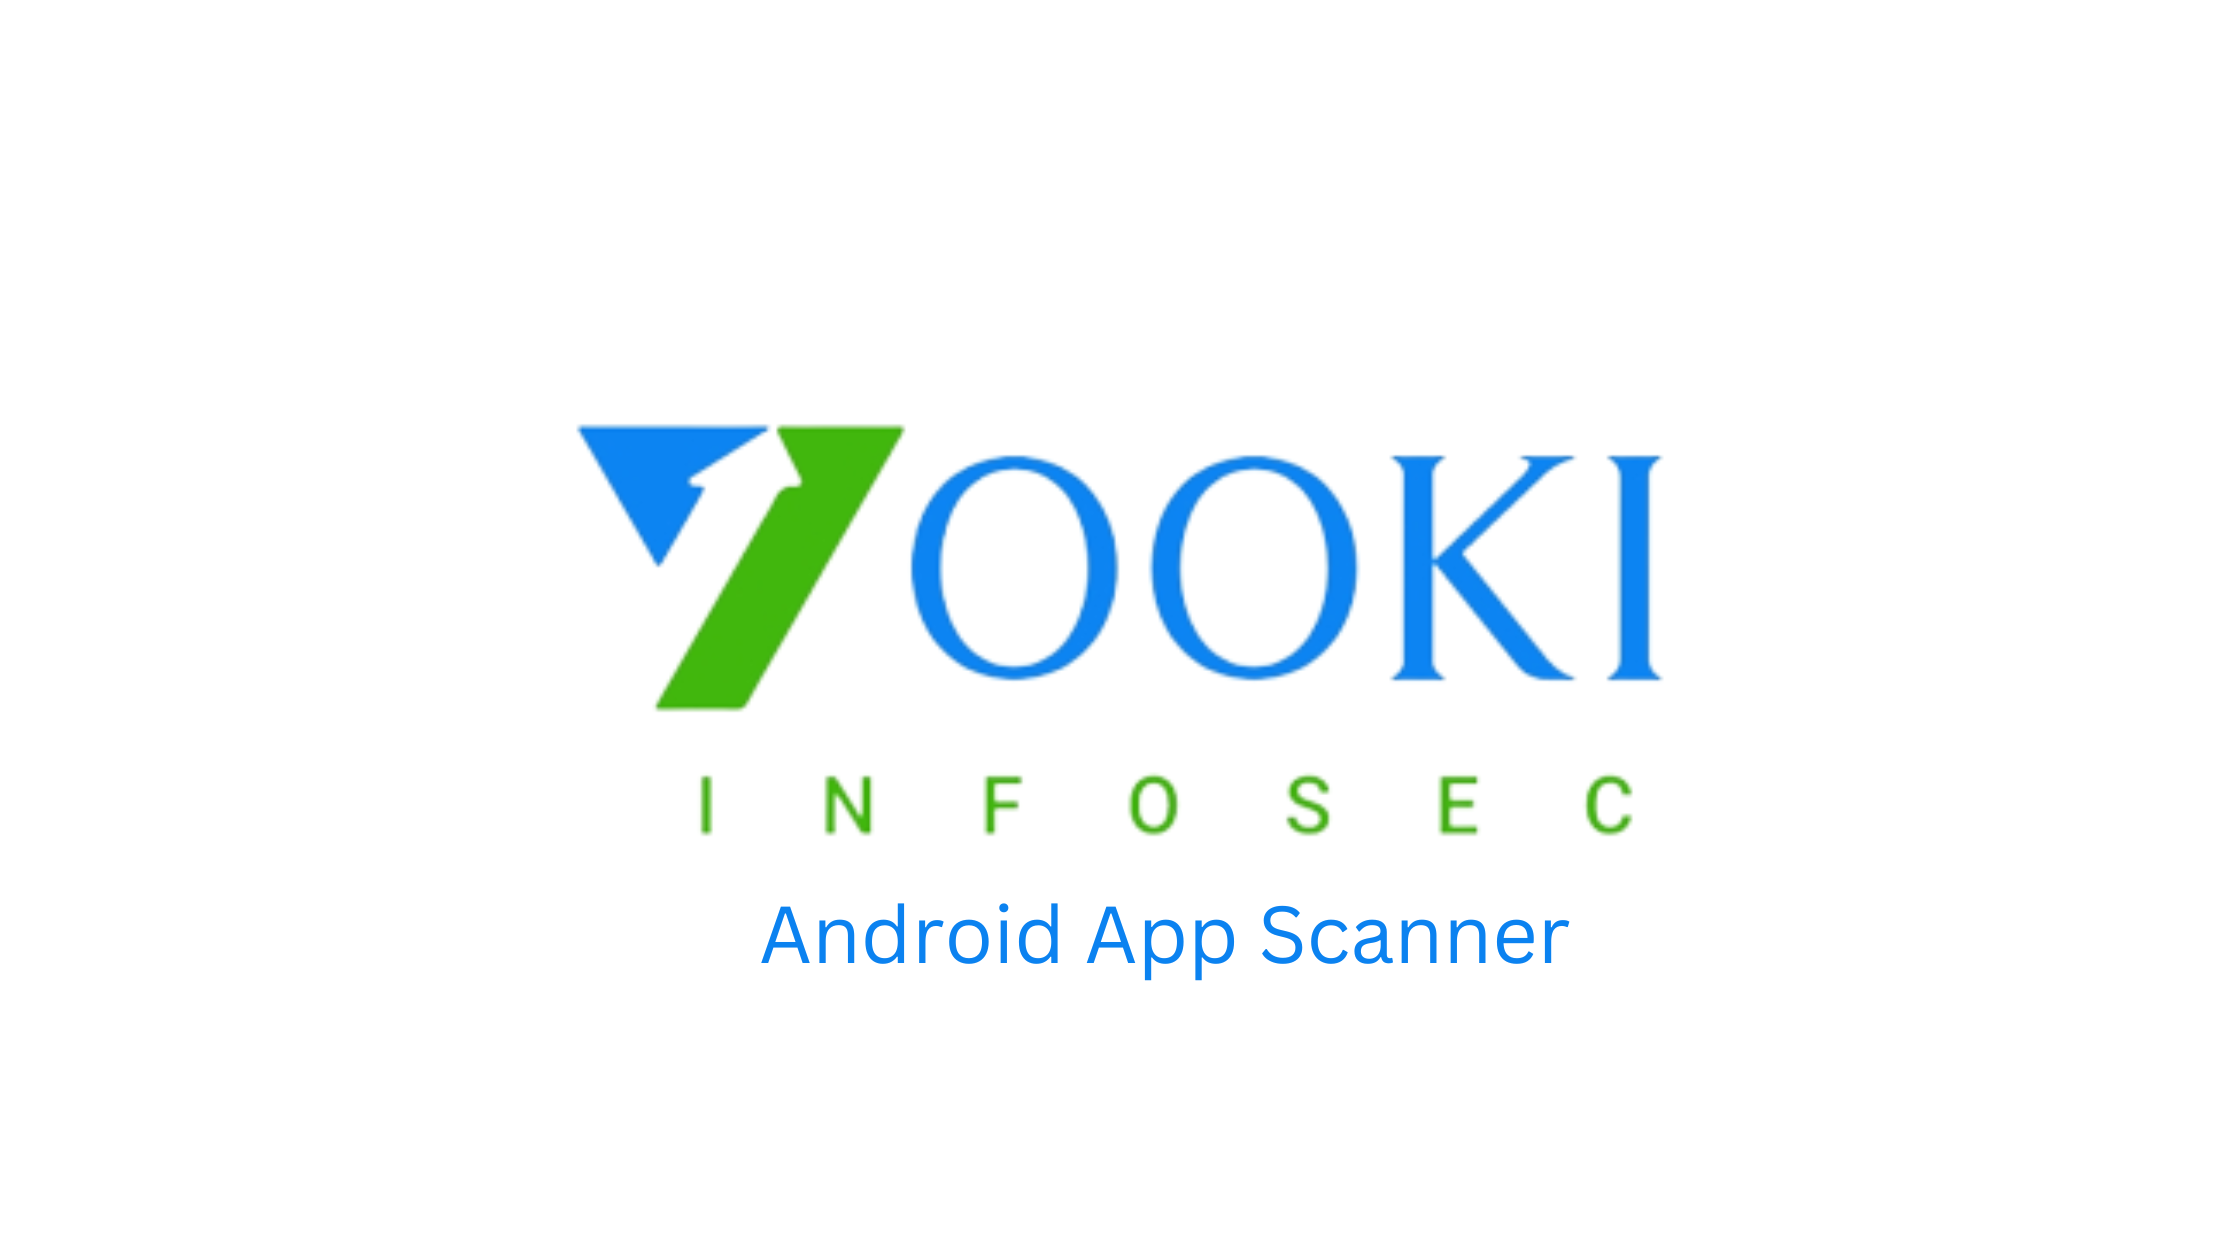 Logo of Vooki Infosec with the text "Android App Scanner" below, indicating their service for scanning security vulnerabilities in Android applications.